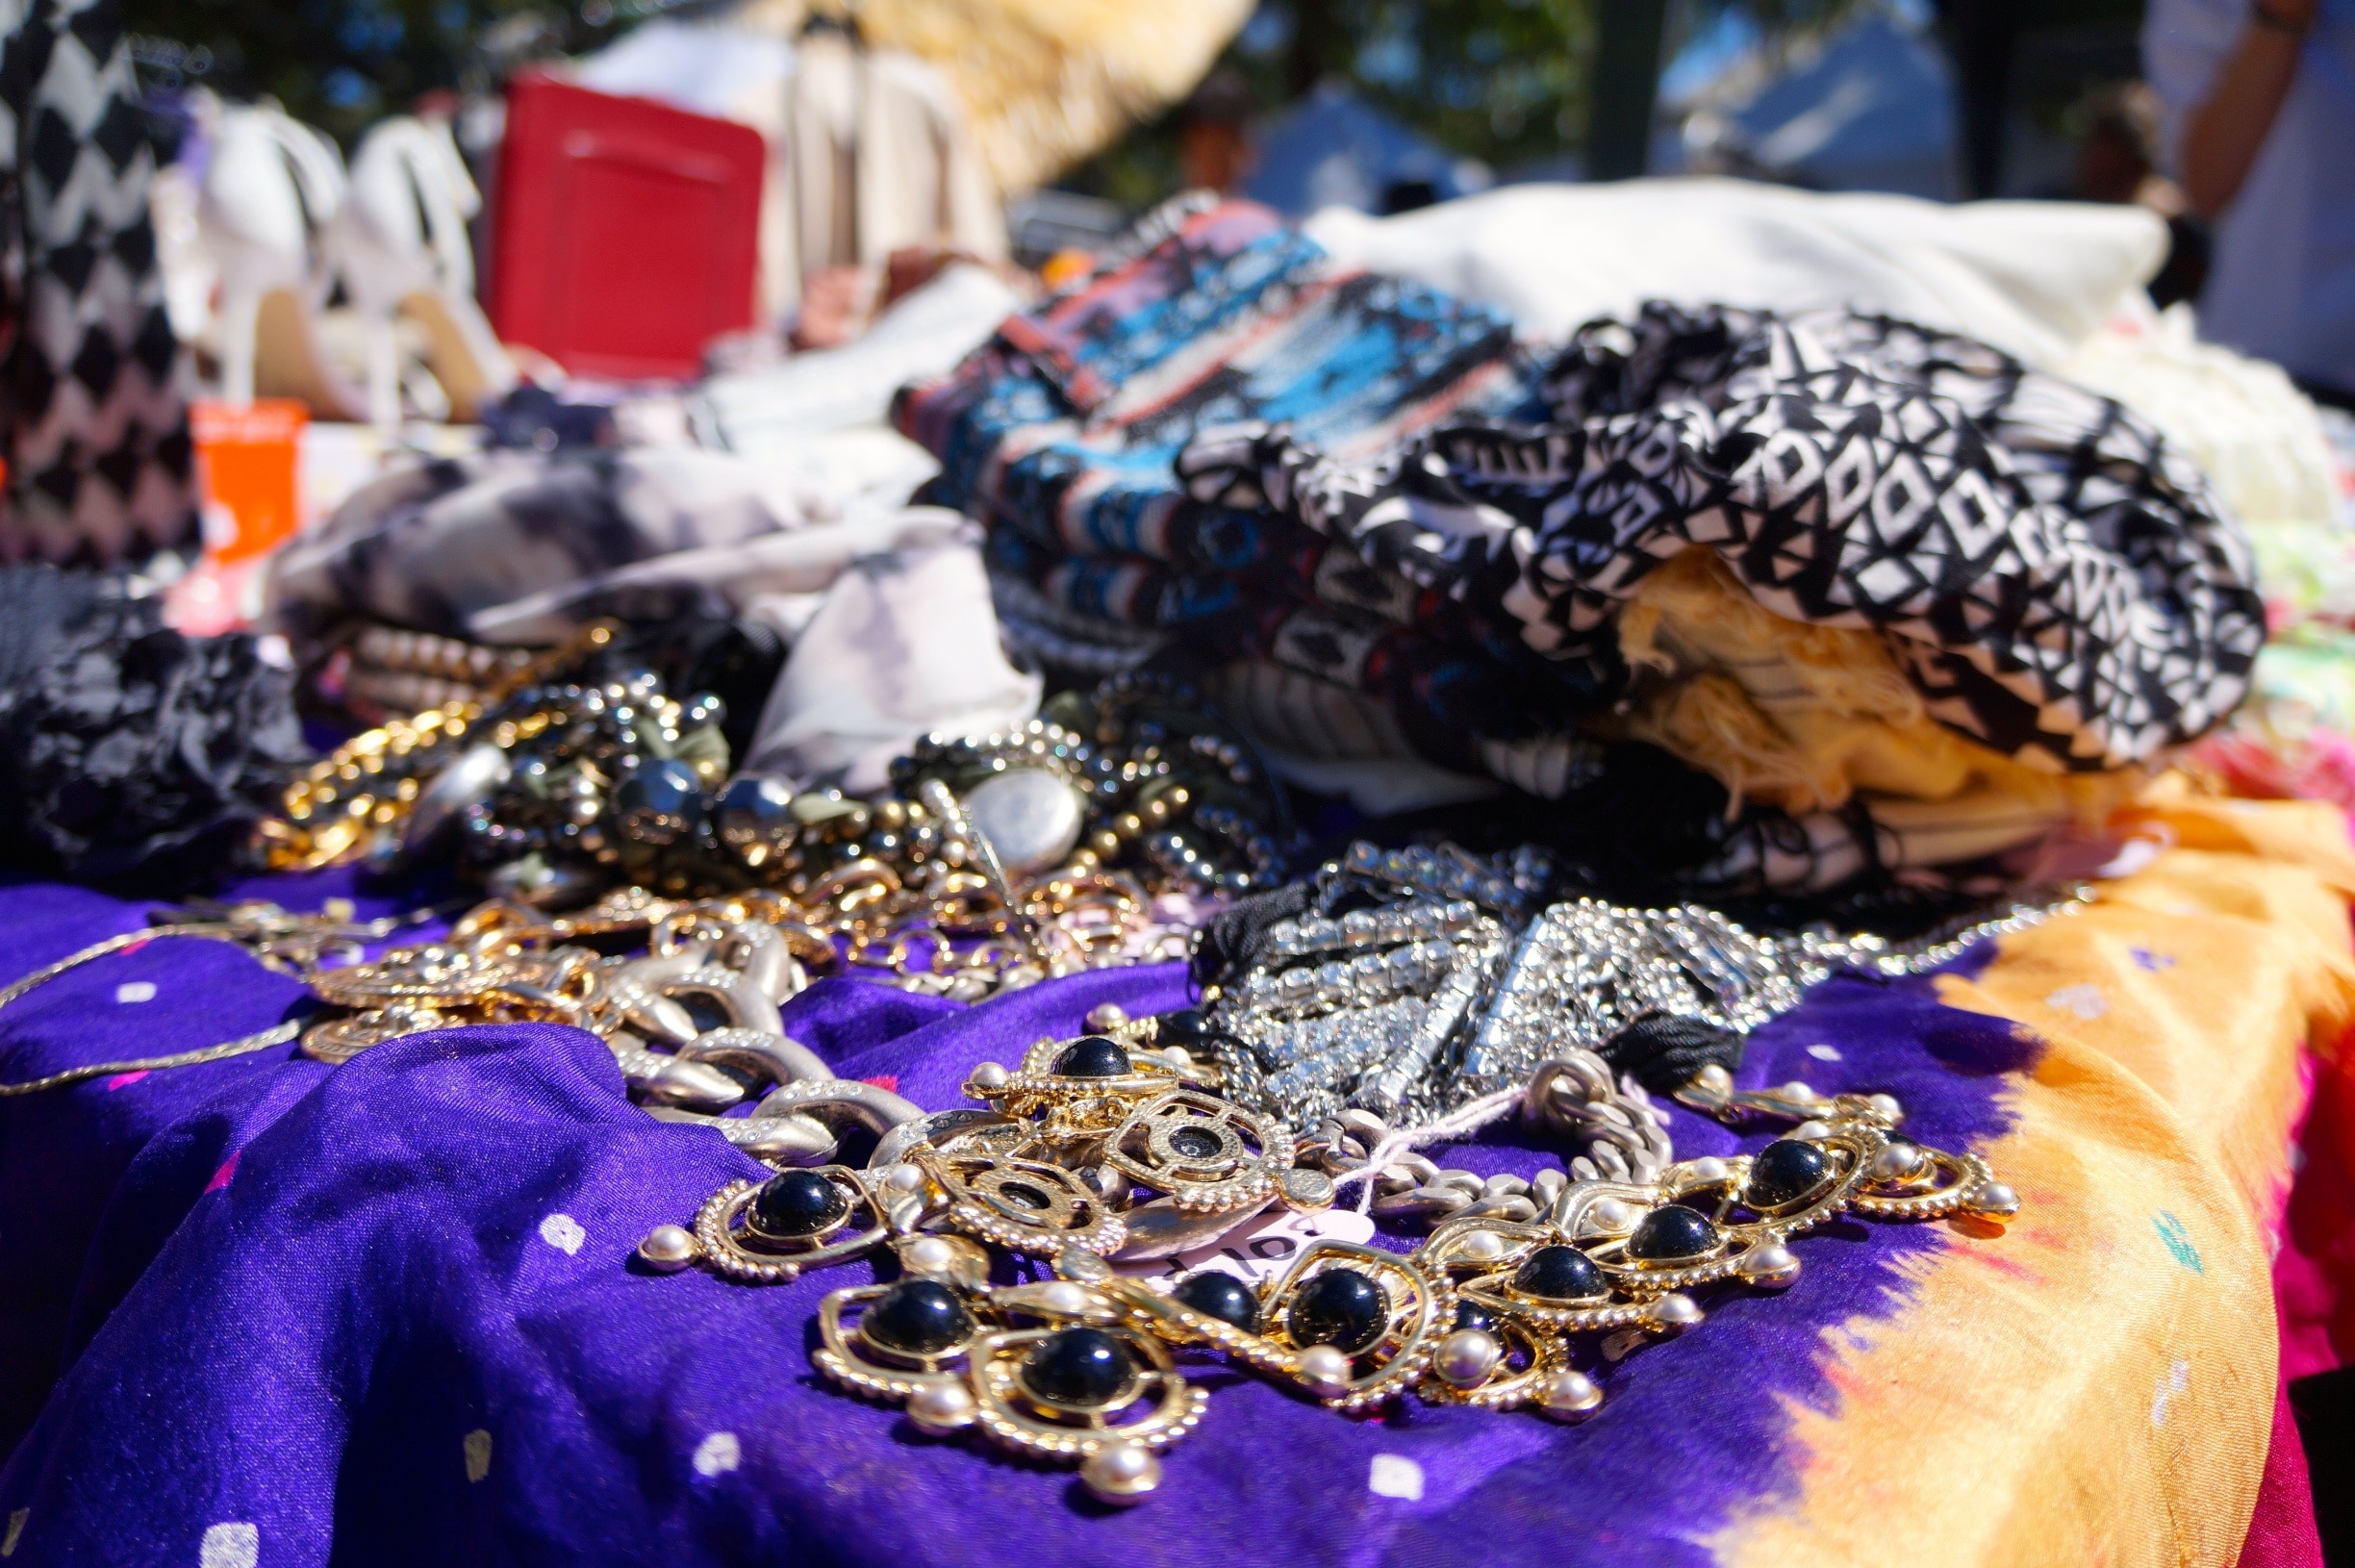 If you're looking for a Sydney souvenir with a difference head to the Glebe Markets which are on every Saturday. There is a huge array of items on offer, from beautiful jewellery and vintage clothing to some delicious food.

www.cheskiesgaplife.com/local-tips-72-hours-sydney

#colorful